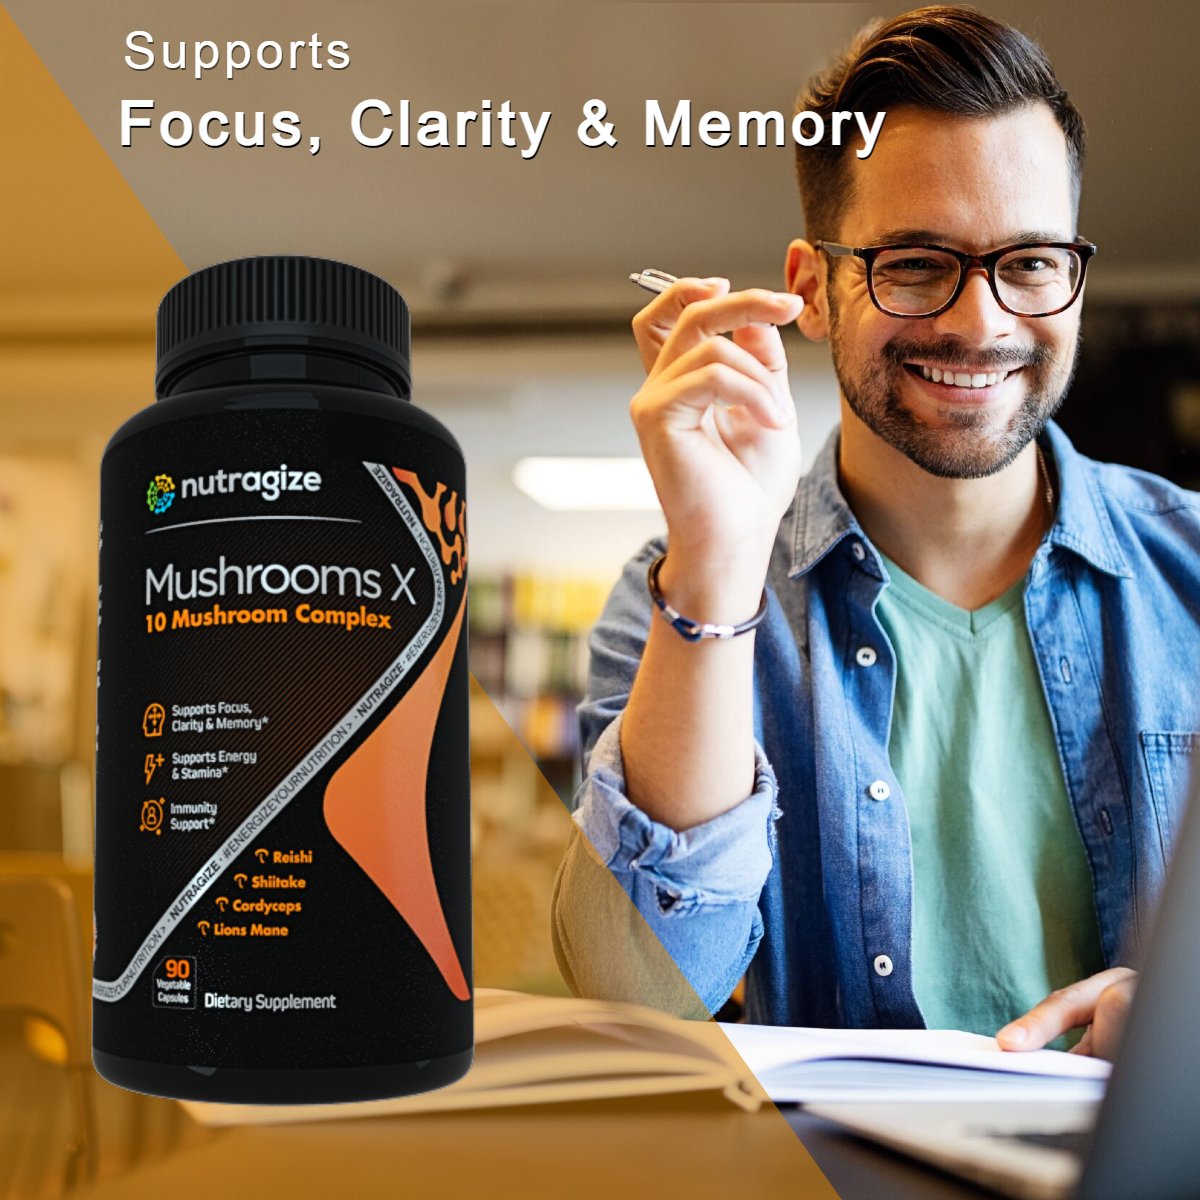 Supports Focus, Clarity & Memory*